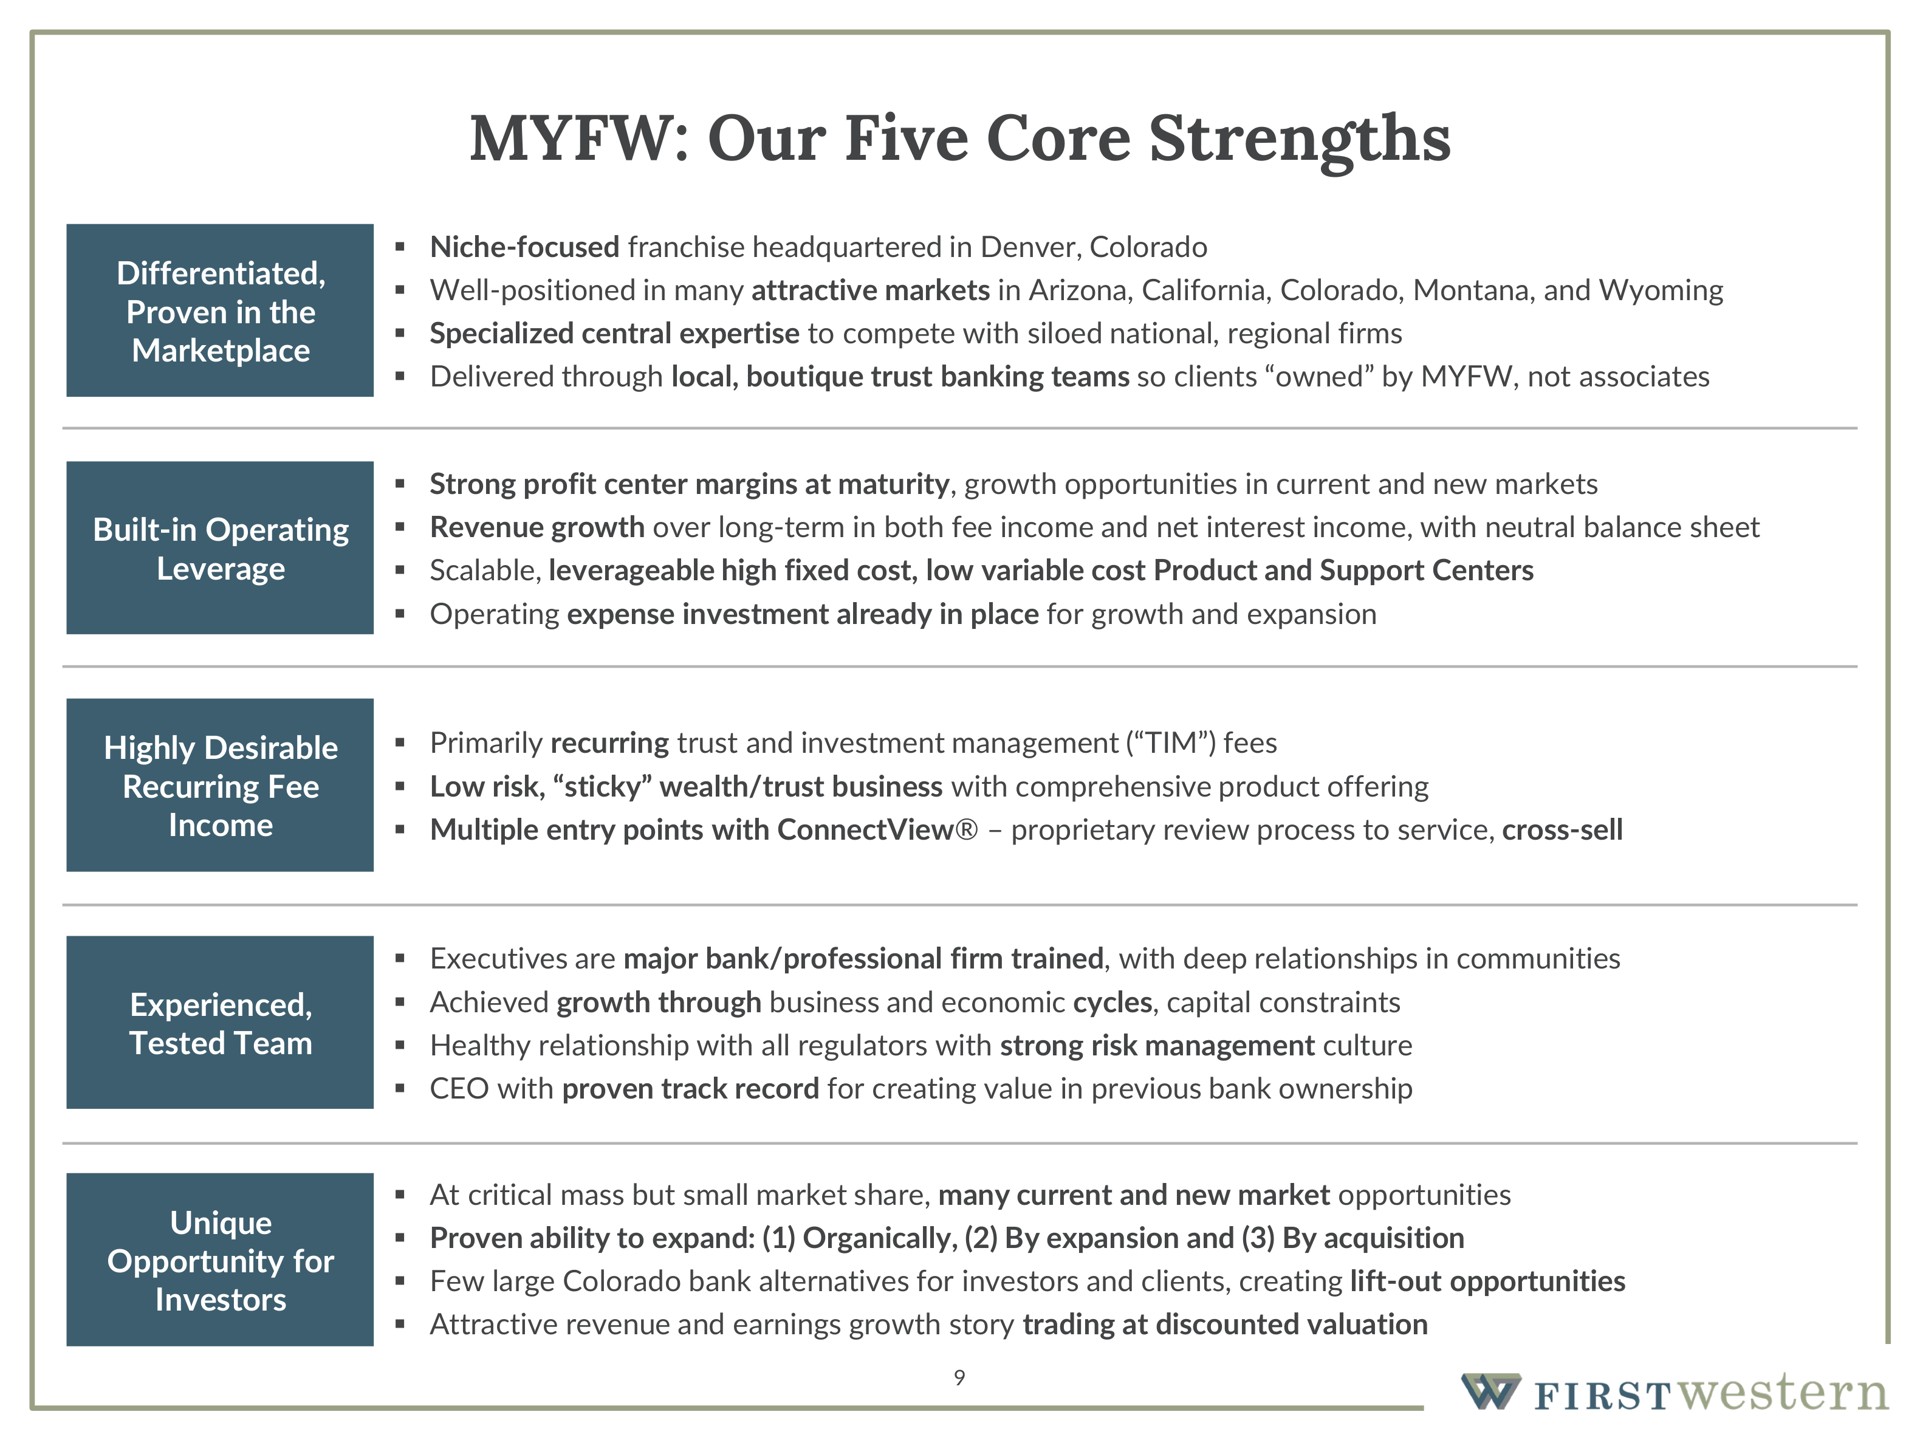 our five core strengths | First Western Financial